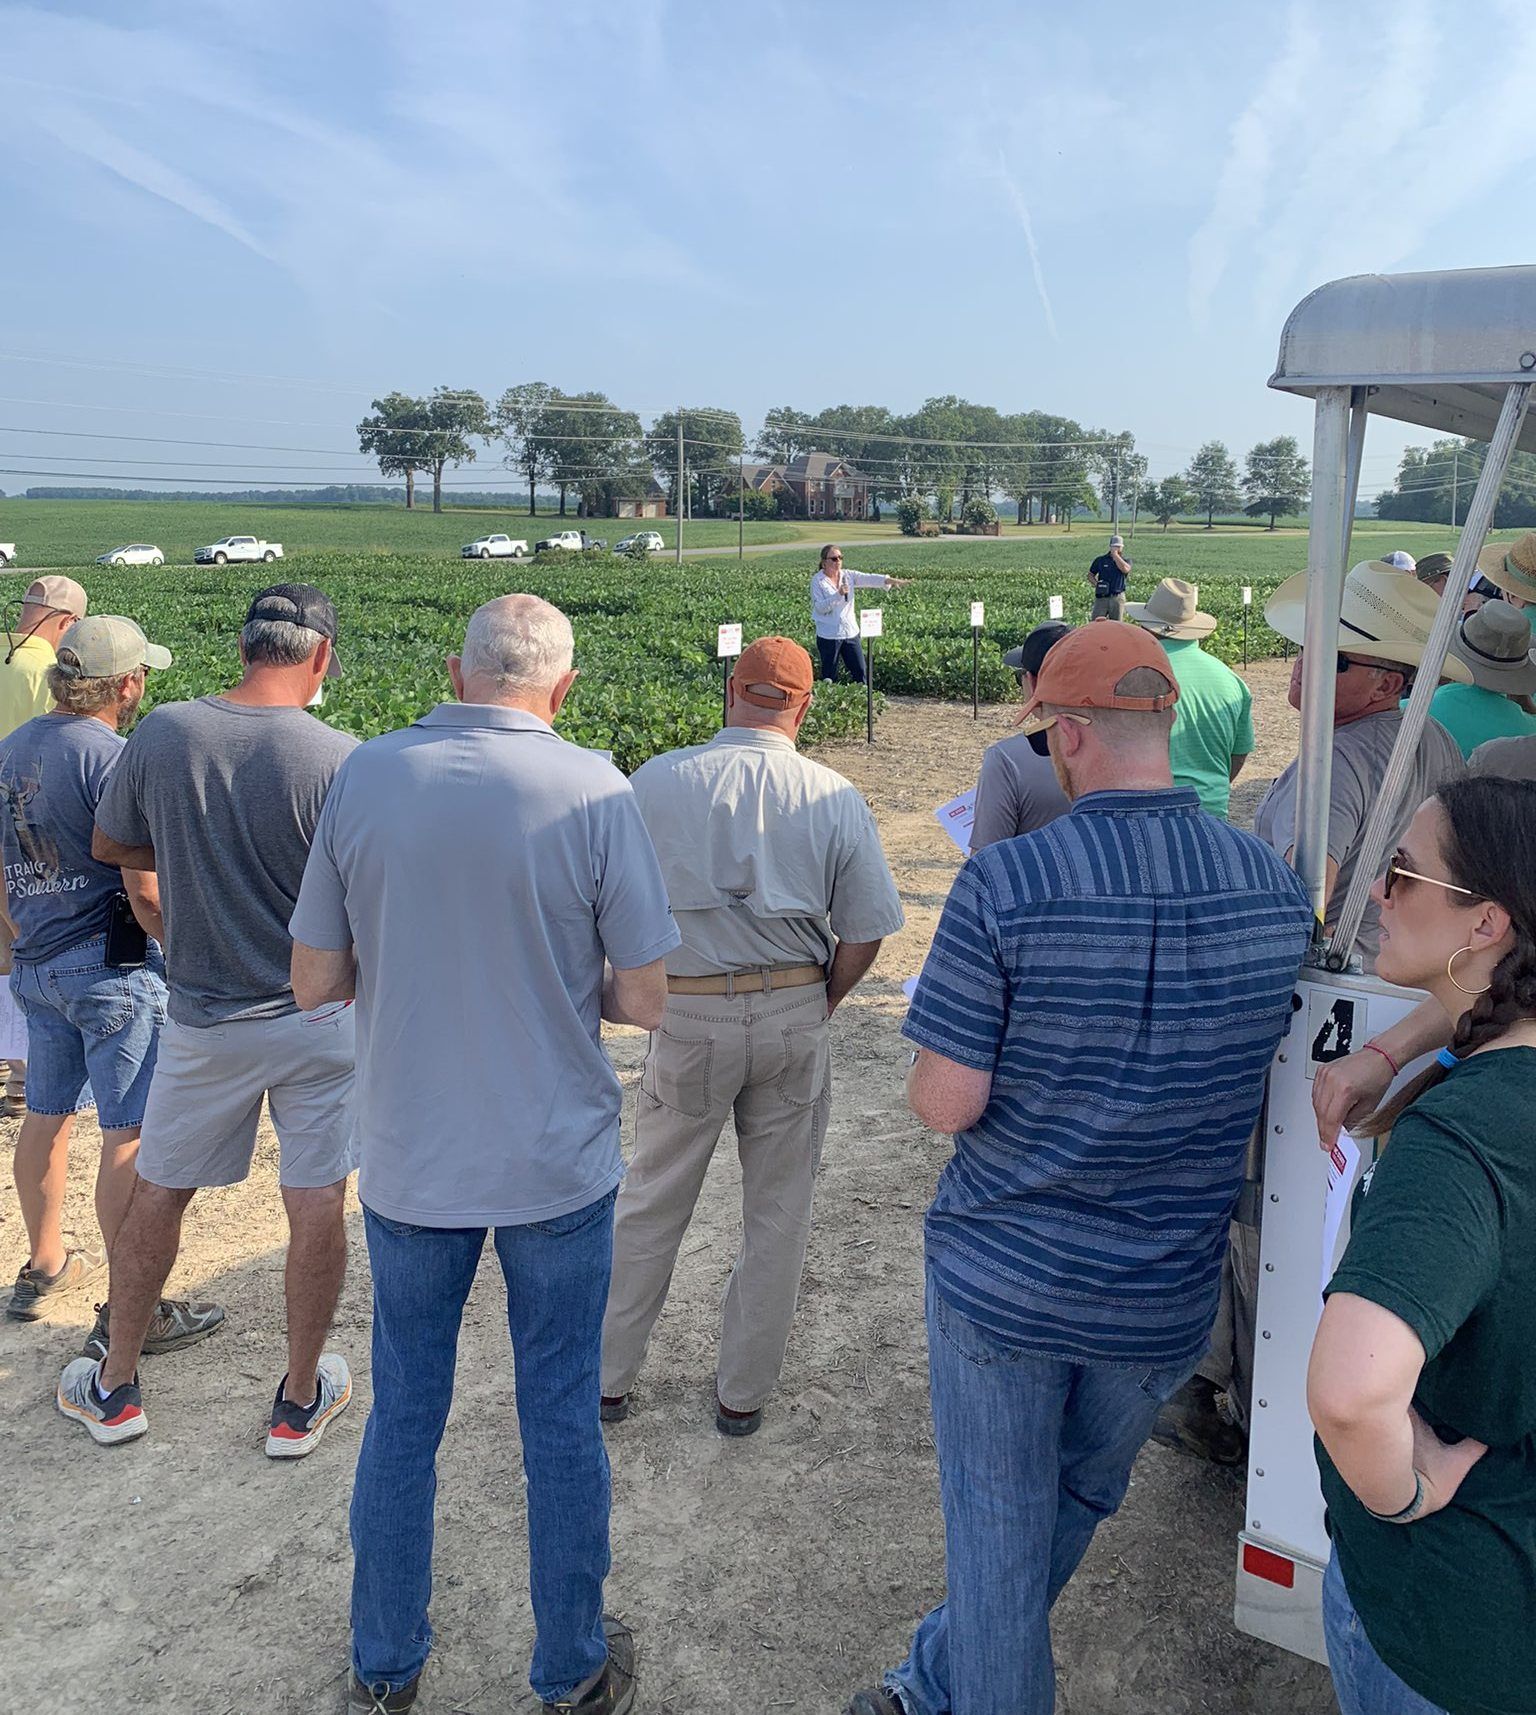 A group of farmers listen to an NC State Extension presentation at a soybean field.